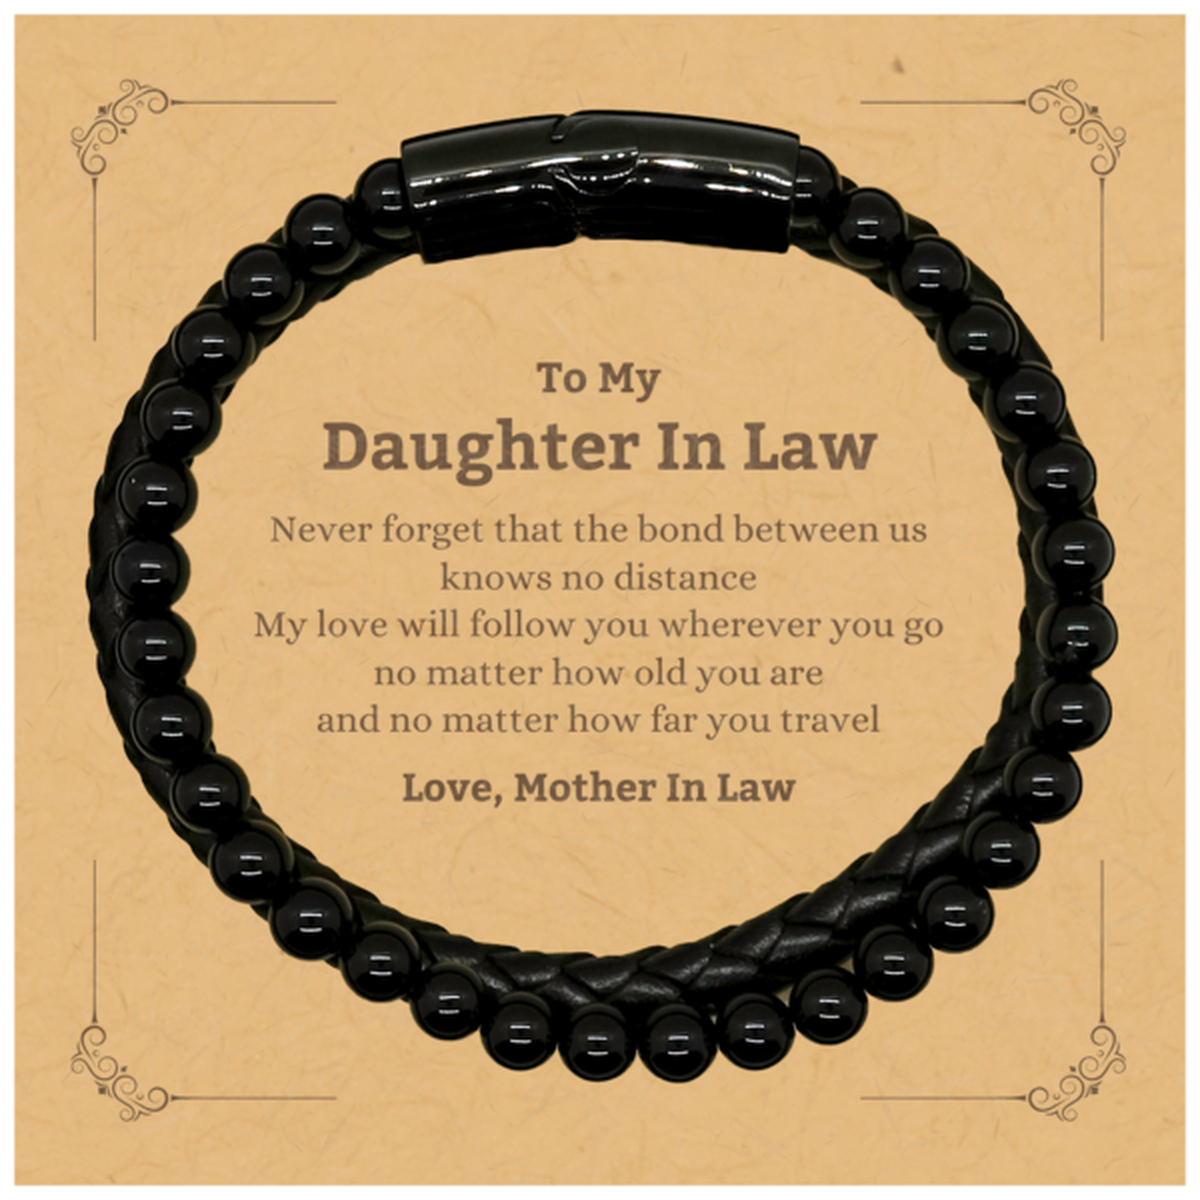 Daughter In Law Birthday Gifts from Mother In Law, Adjustable Stone Leather Bracelets for Daughter In Law Christmas Graduation Unique Gifts Daughter In Law Never forget that the bond between us knows no distance. Love, Mother In Law